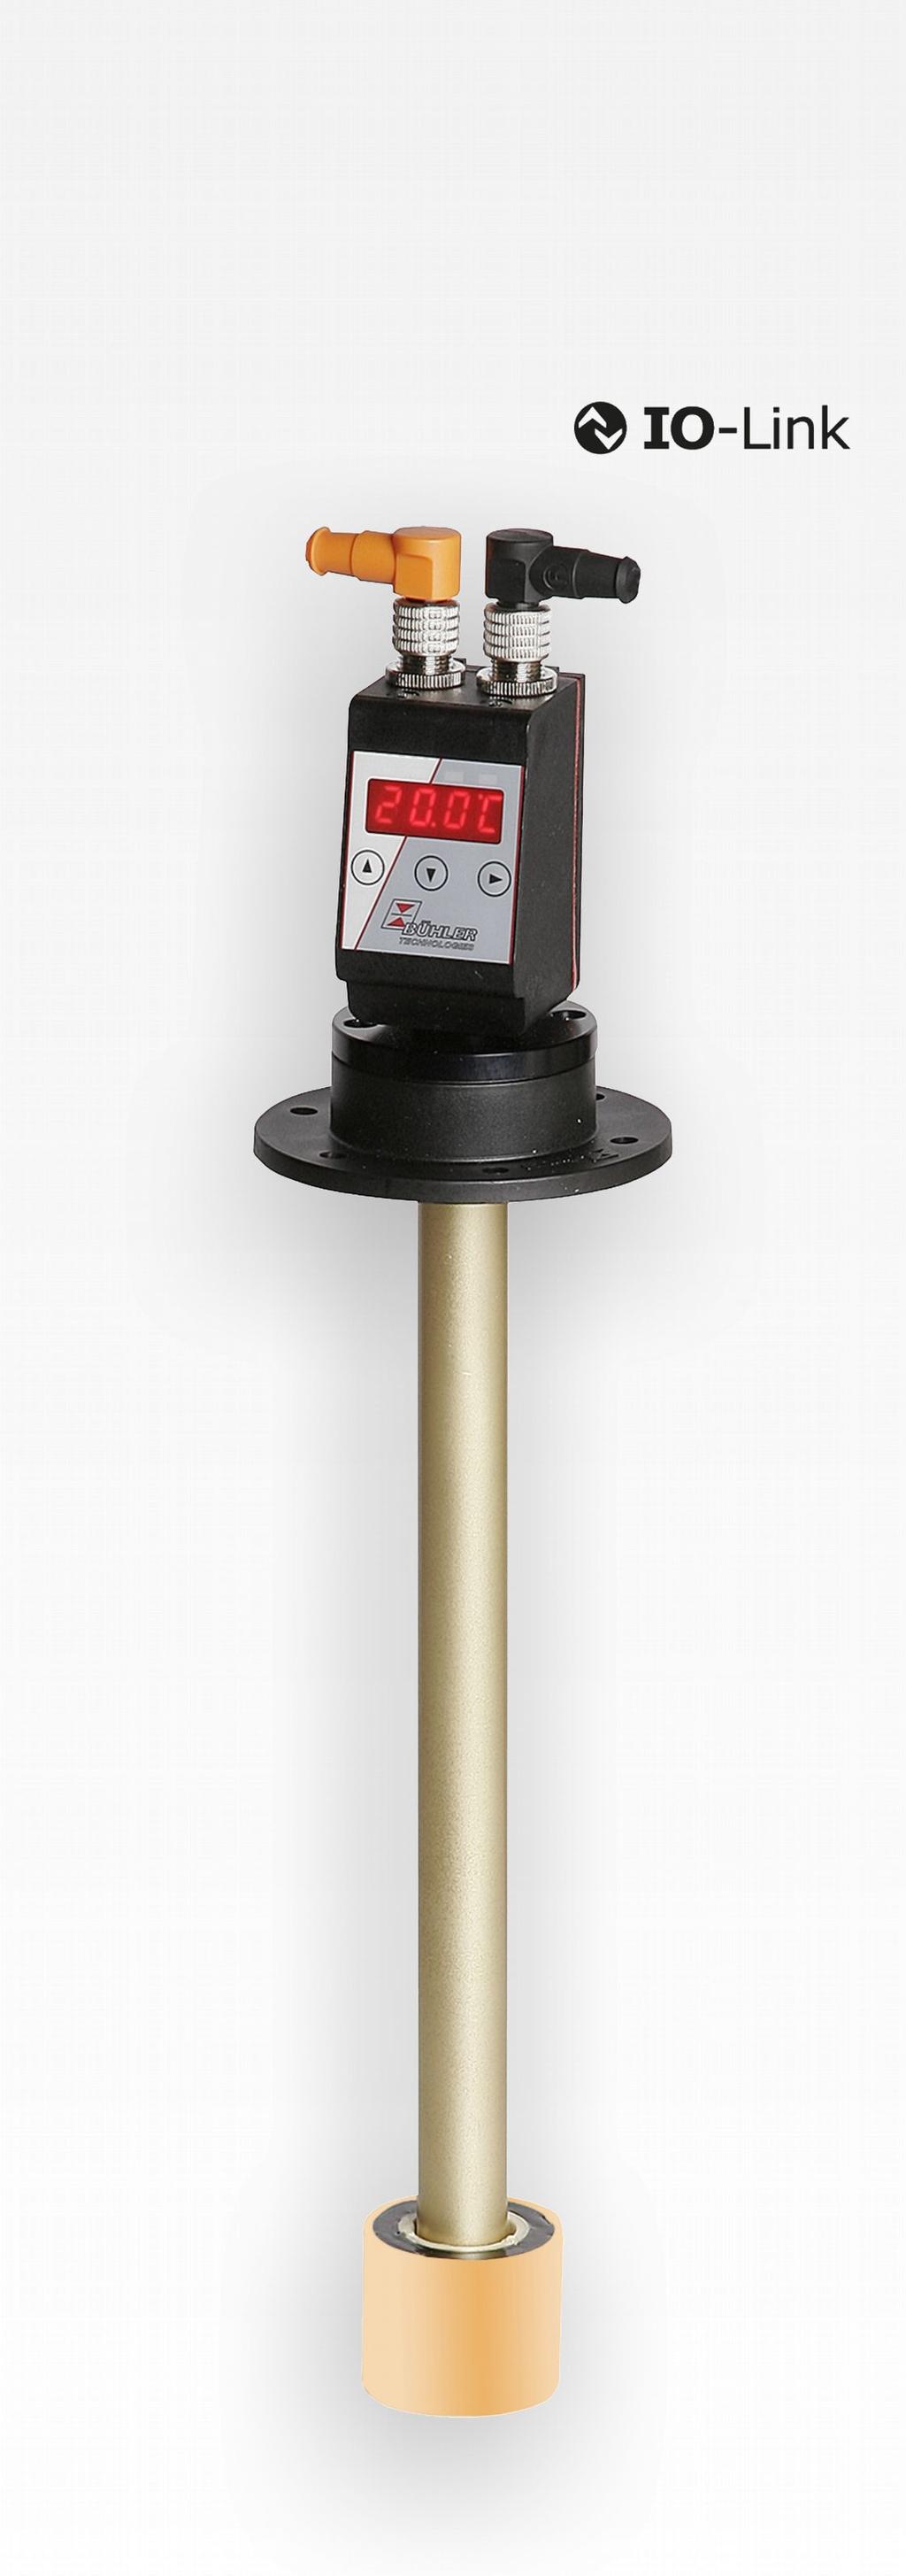 Level- and temperature sensor Nivotemp NT 67-XP Fluidcontrol In hydraulics and lubrication technology the fill level of oil tanks needs to be monitored continuously.